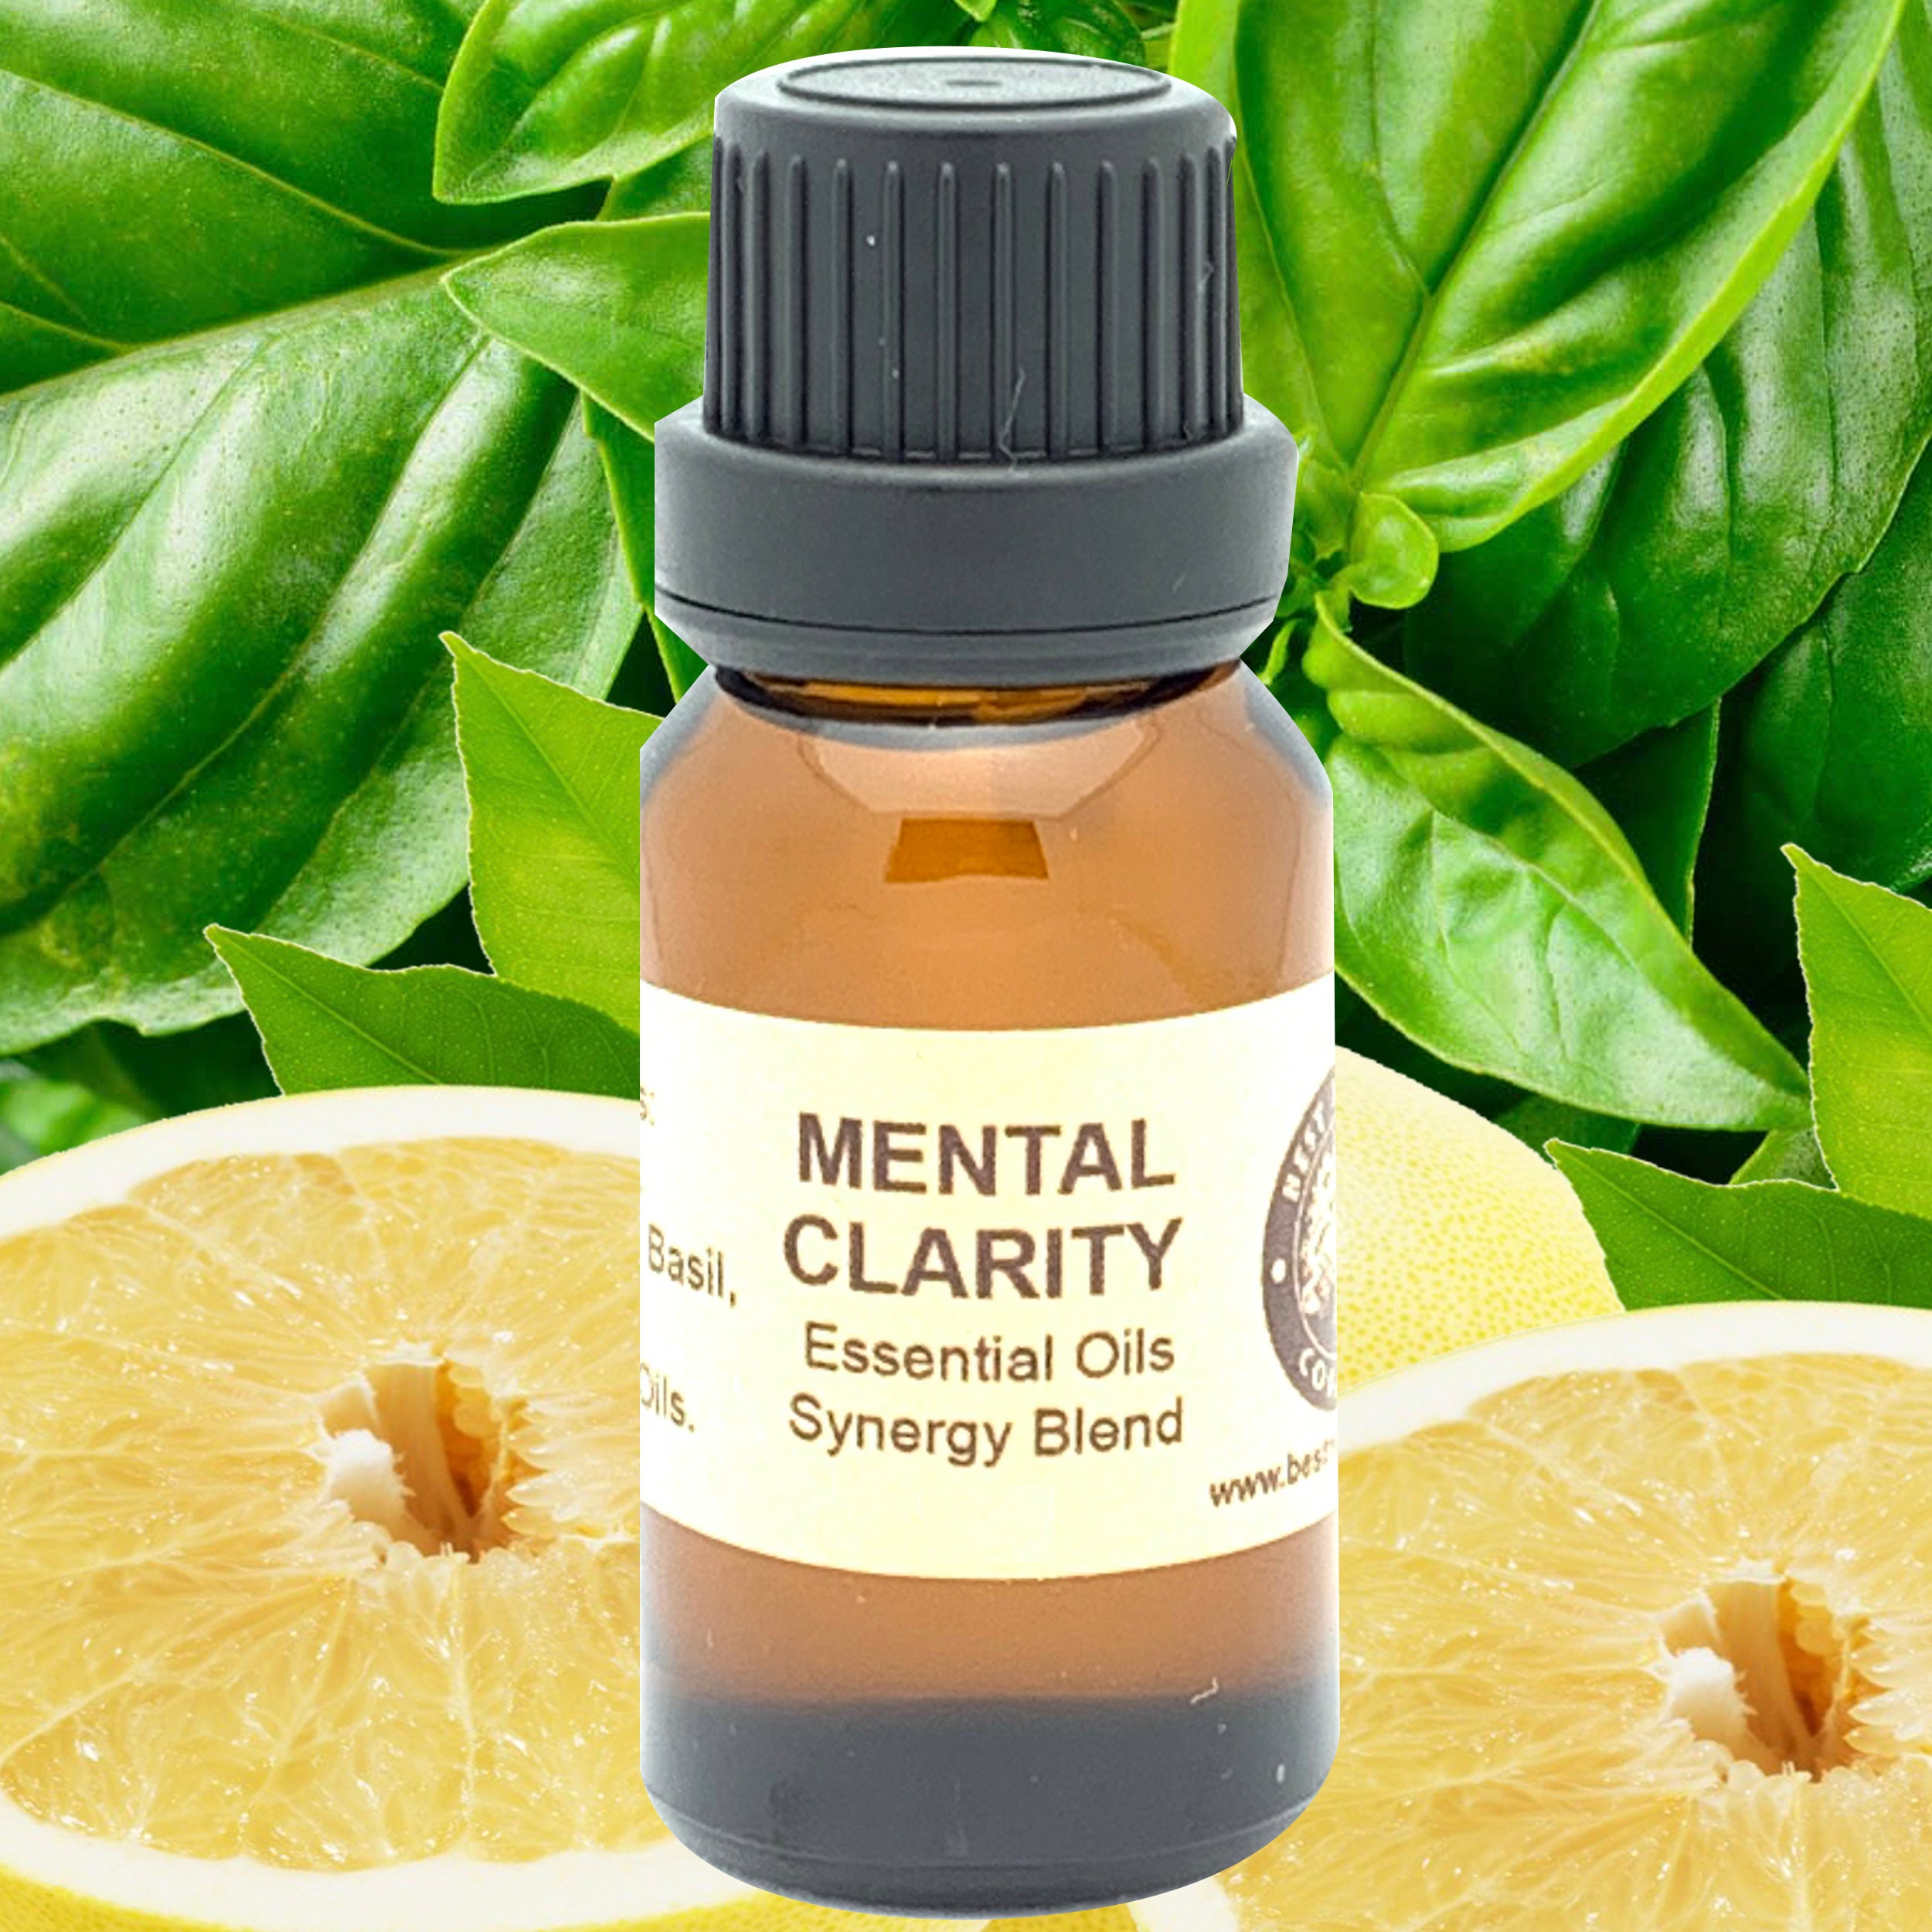 Essential oils for mental clarity